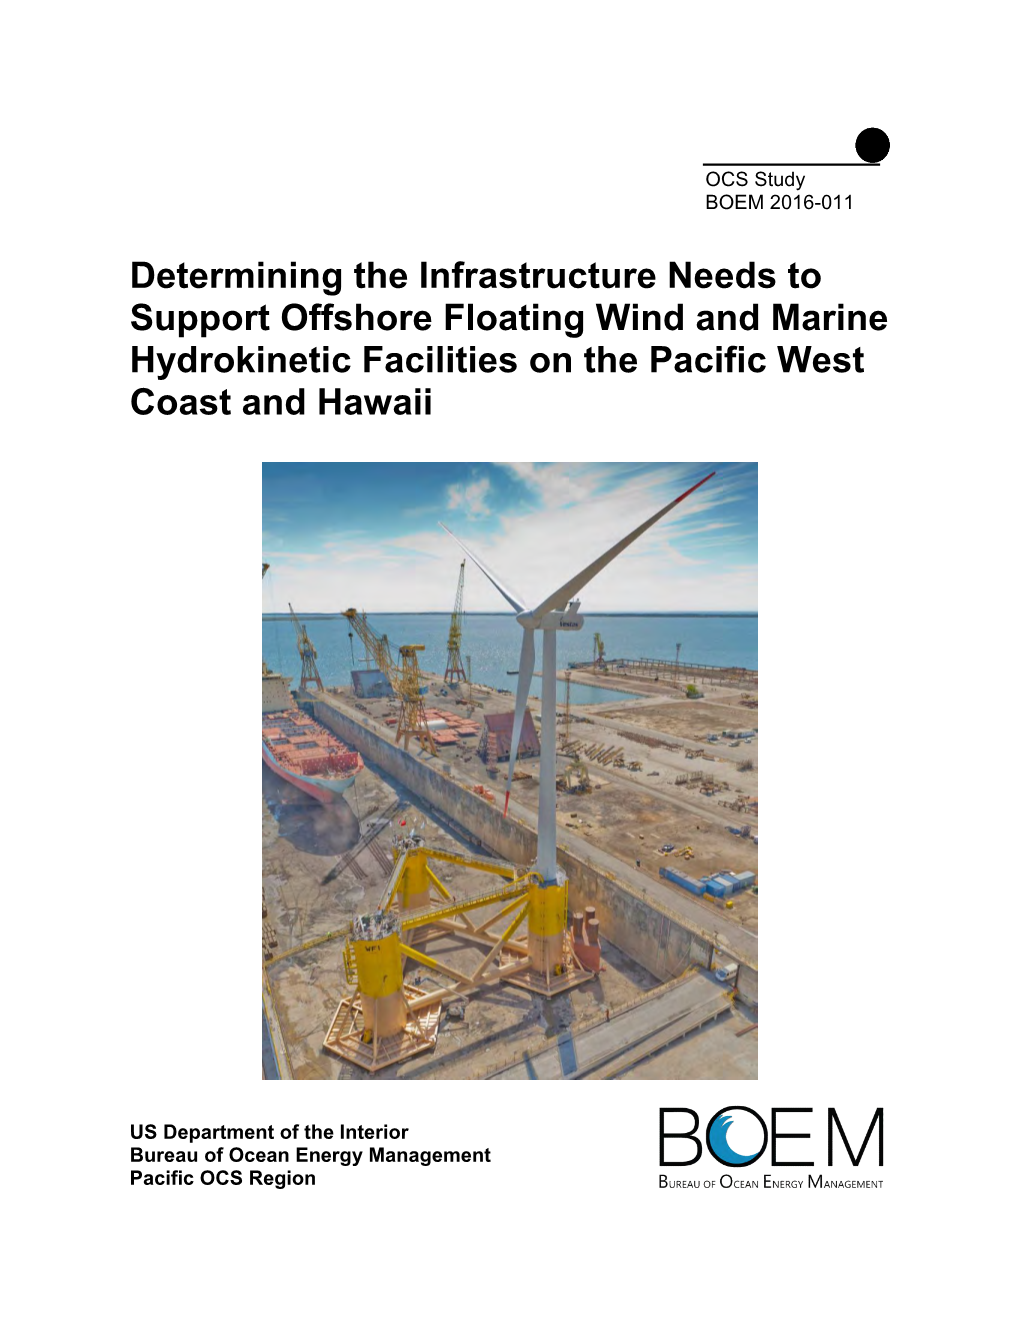 Determining the Infrastructure Needs to Support Offshore Floating Wind and Marine Hydrokinetic Facilities on the Pacific West Coast and Hawaii